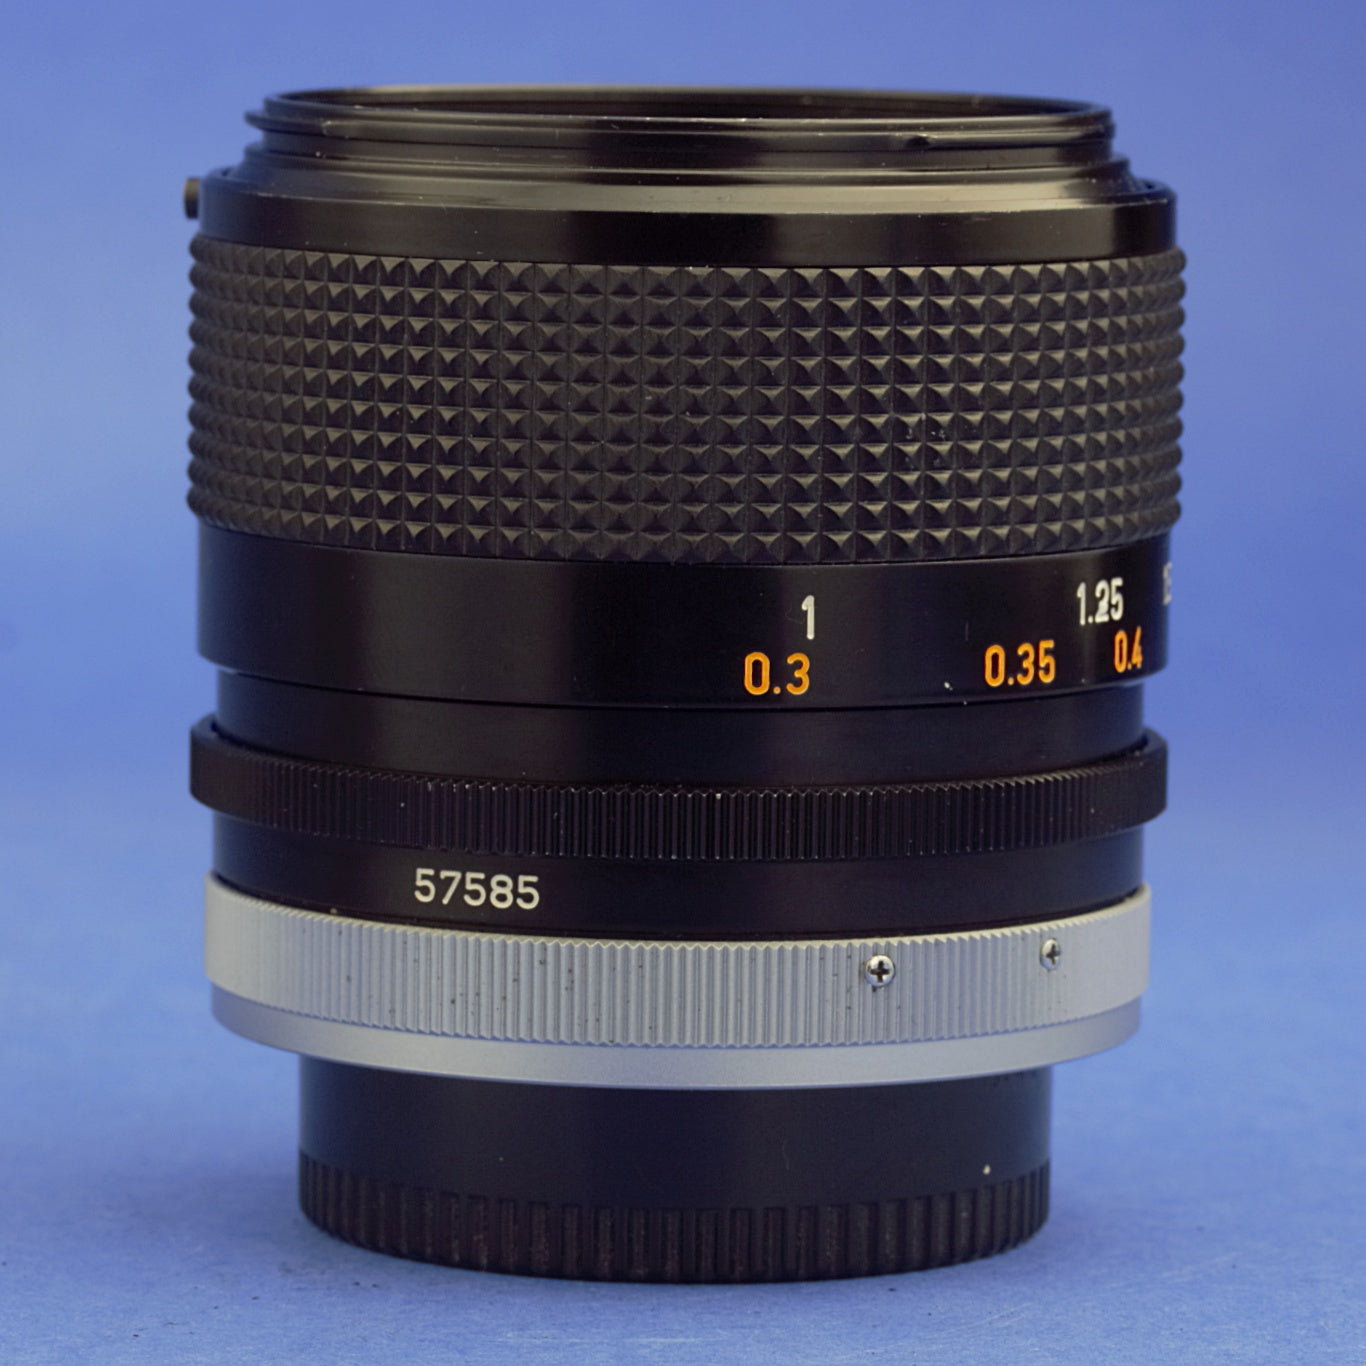 Canon FD 35mm F2 S.S.C. Concave "O" Lens